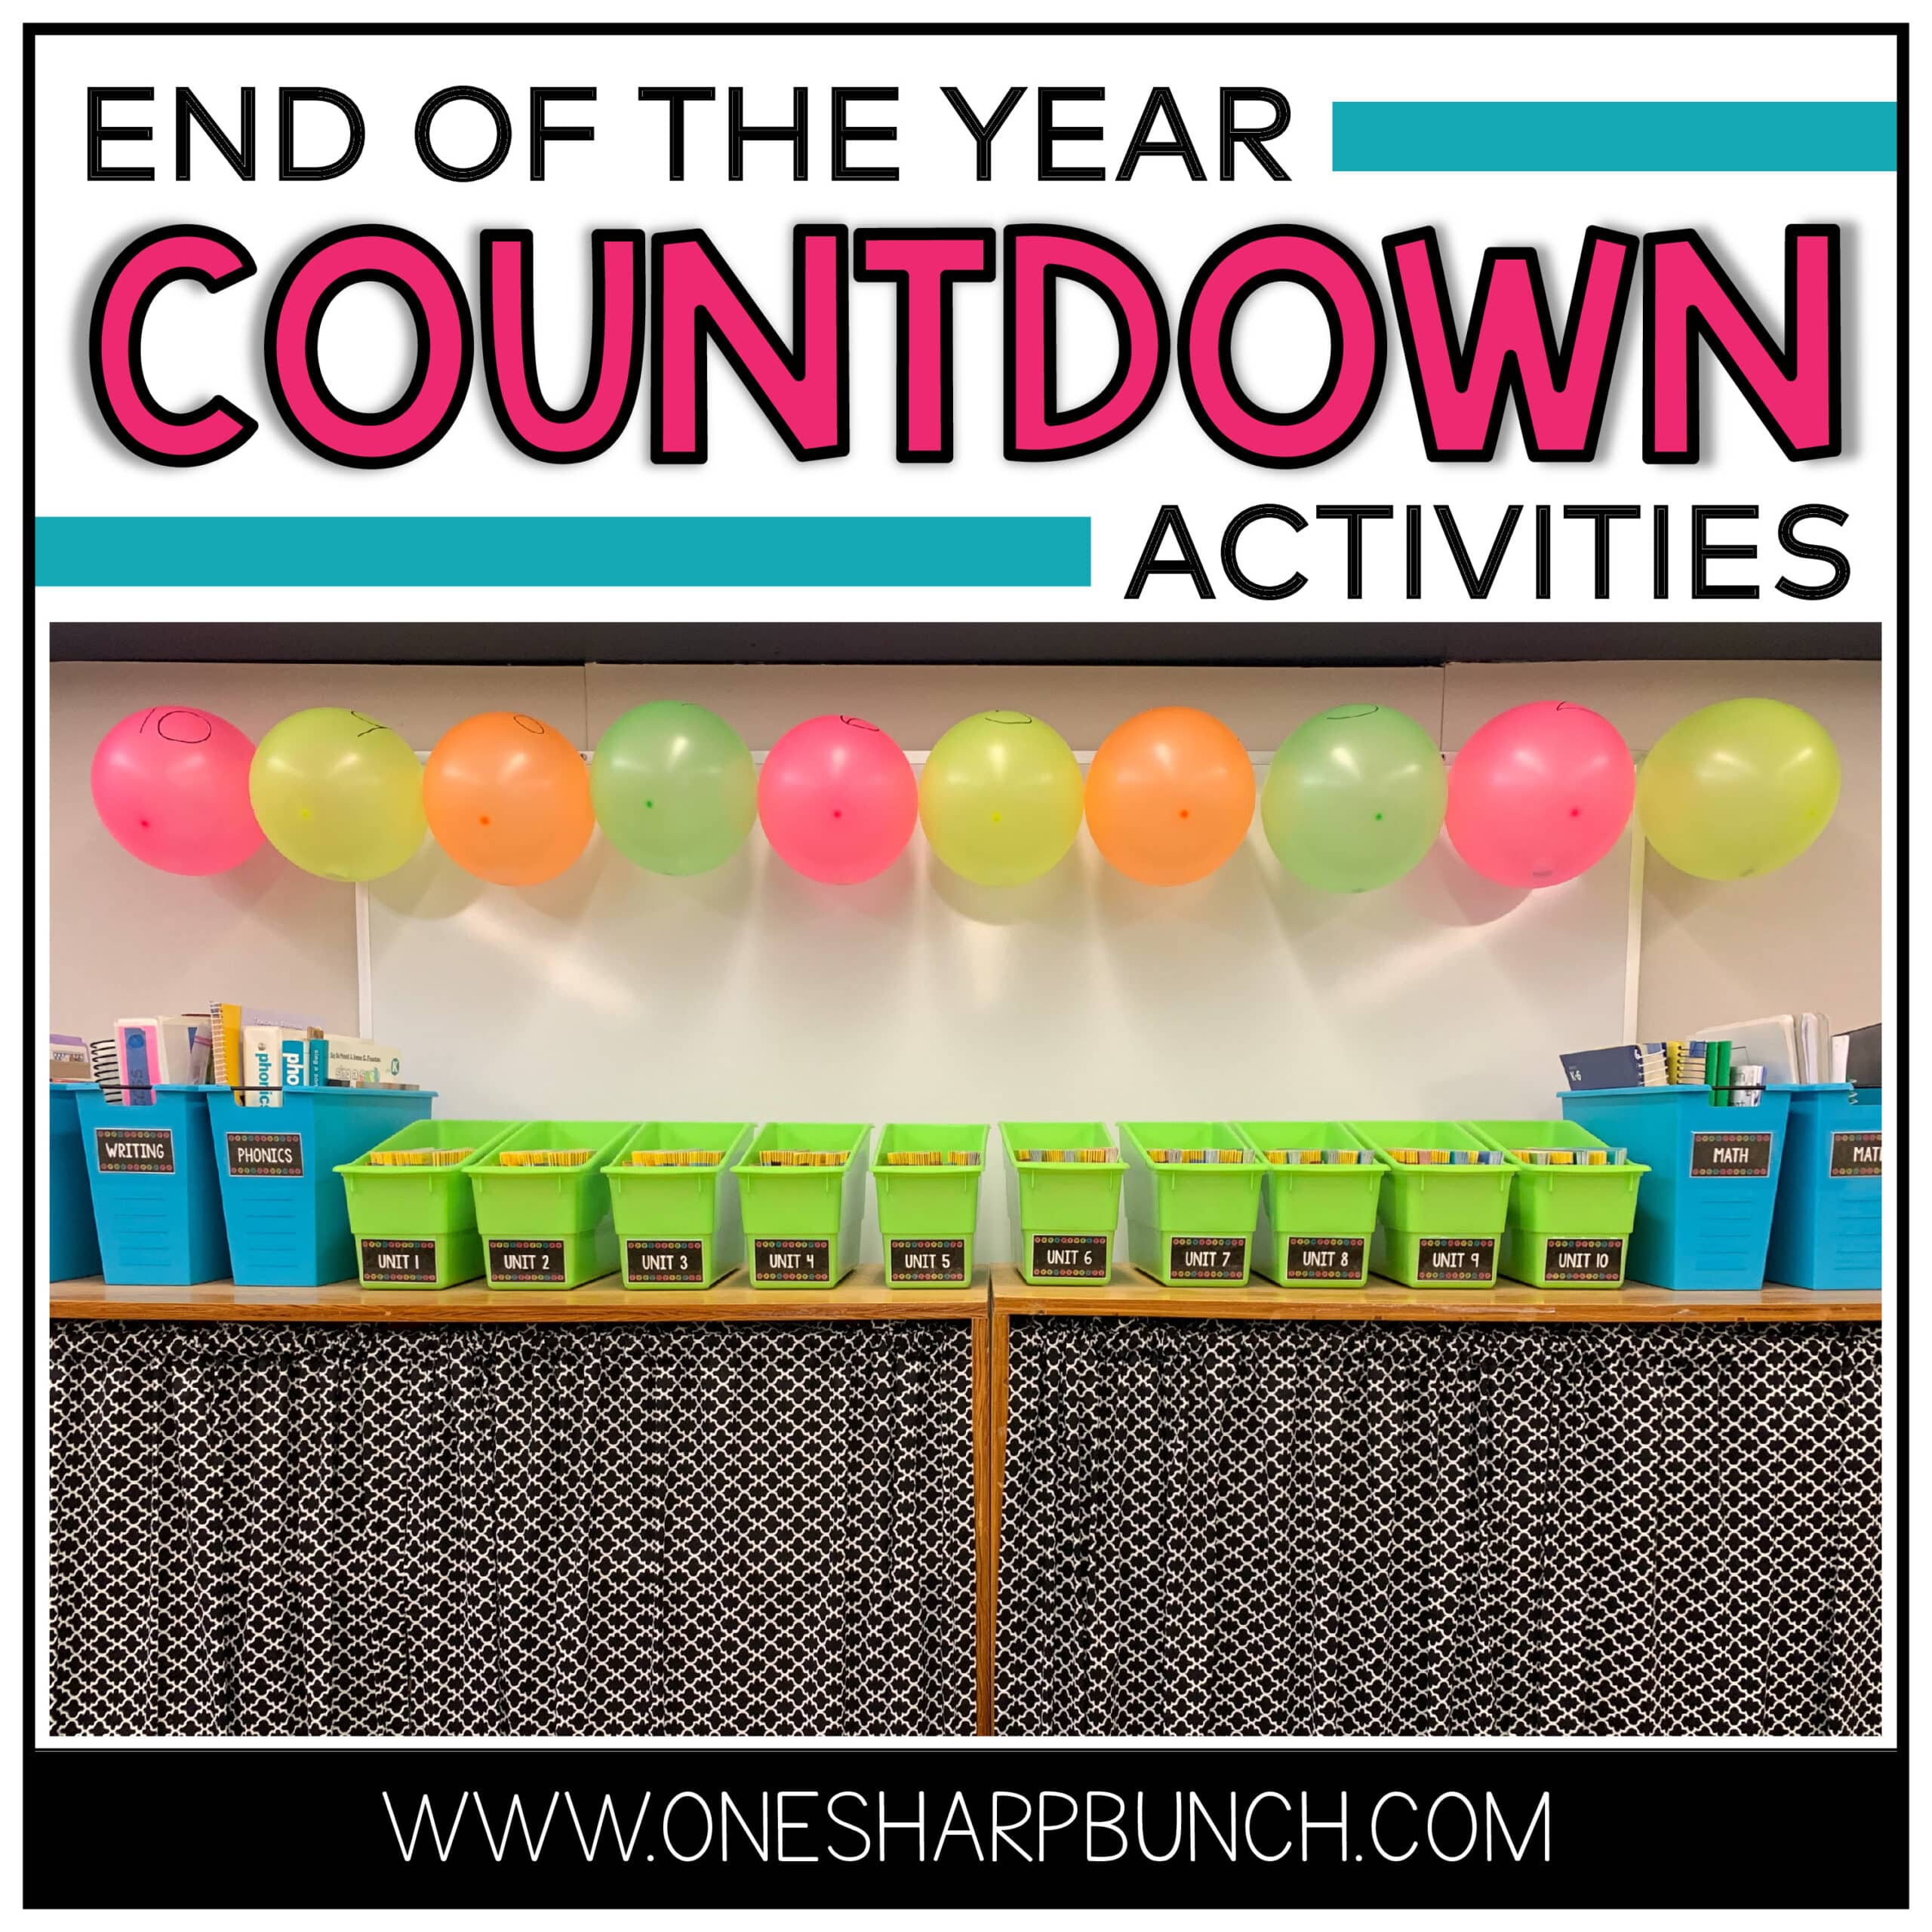 Engaging End of the Year Countdown Activities to Celebrate the School Year